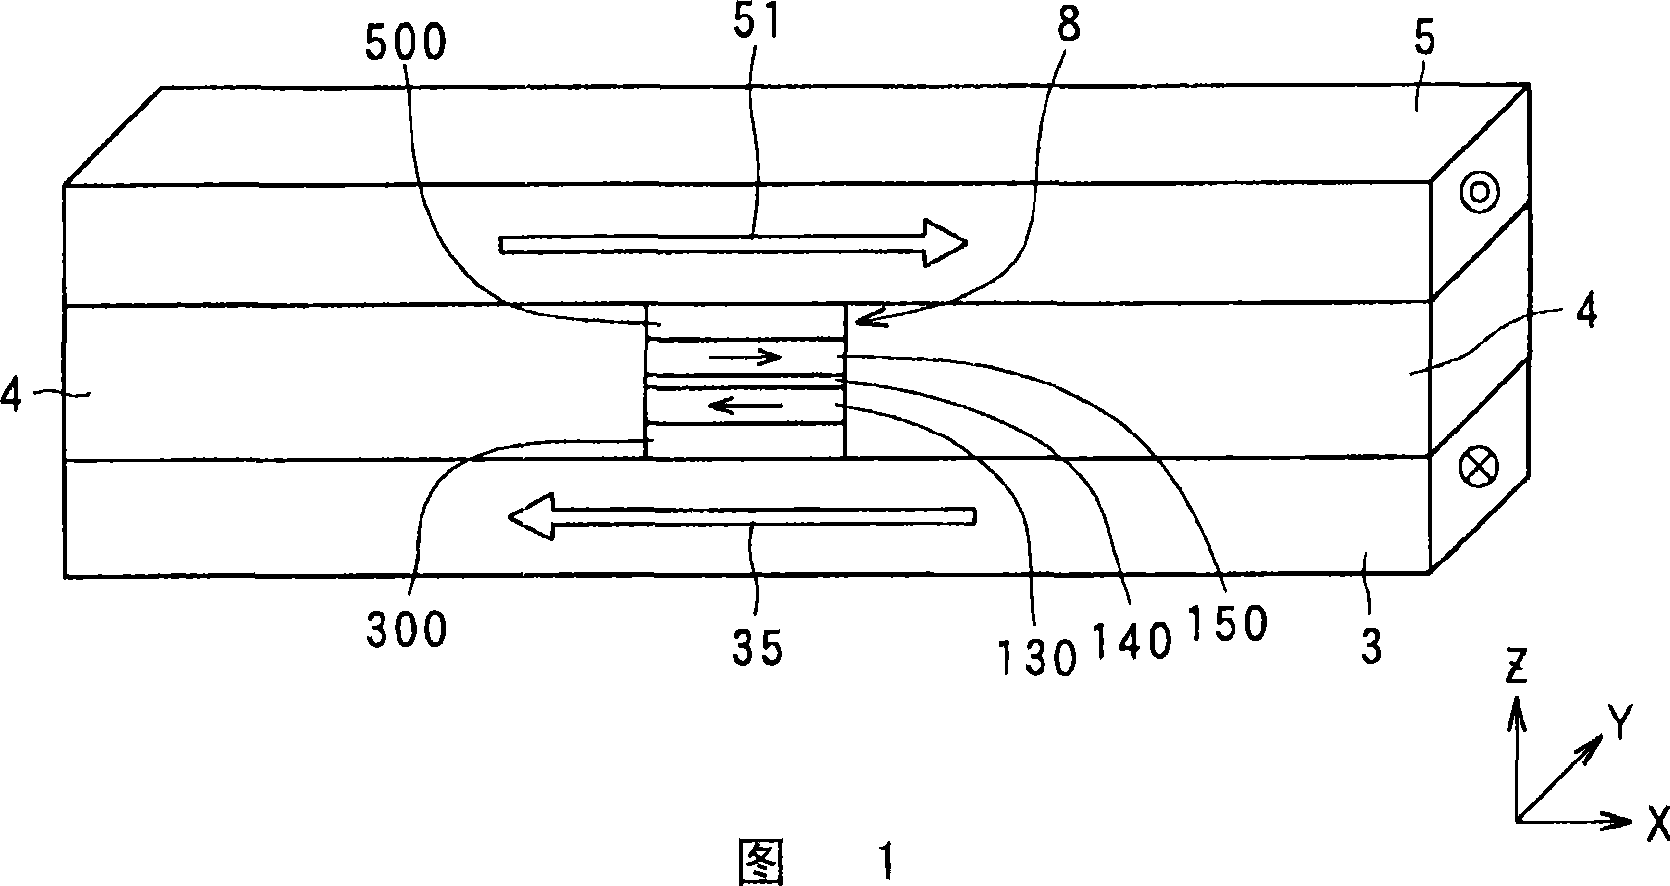 Magneto-resistive effect device of the cpp type, and magnetic disk system